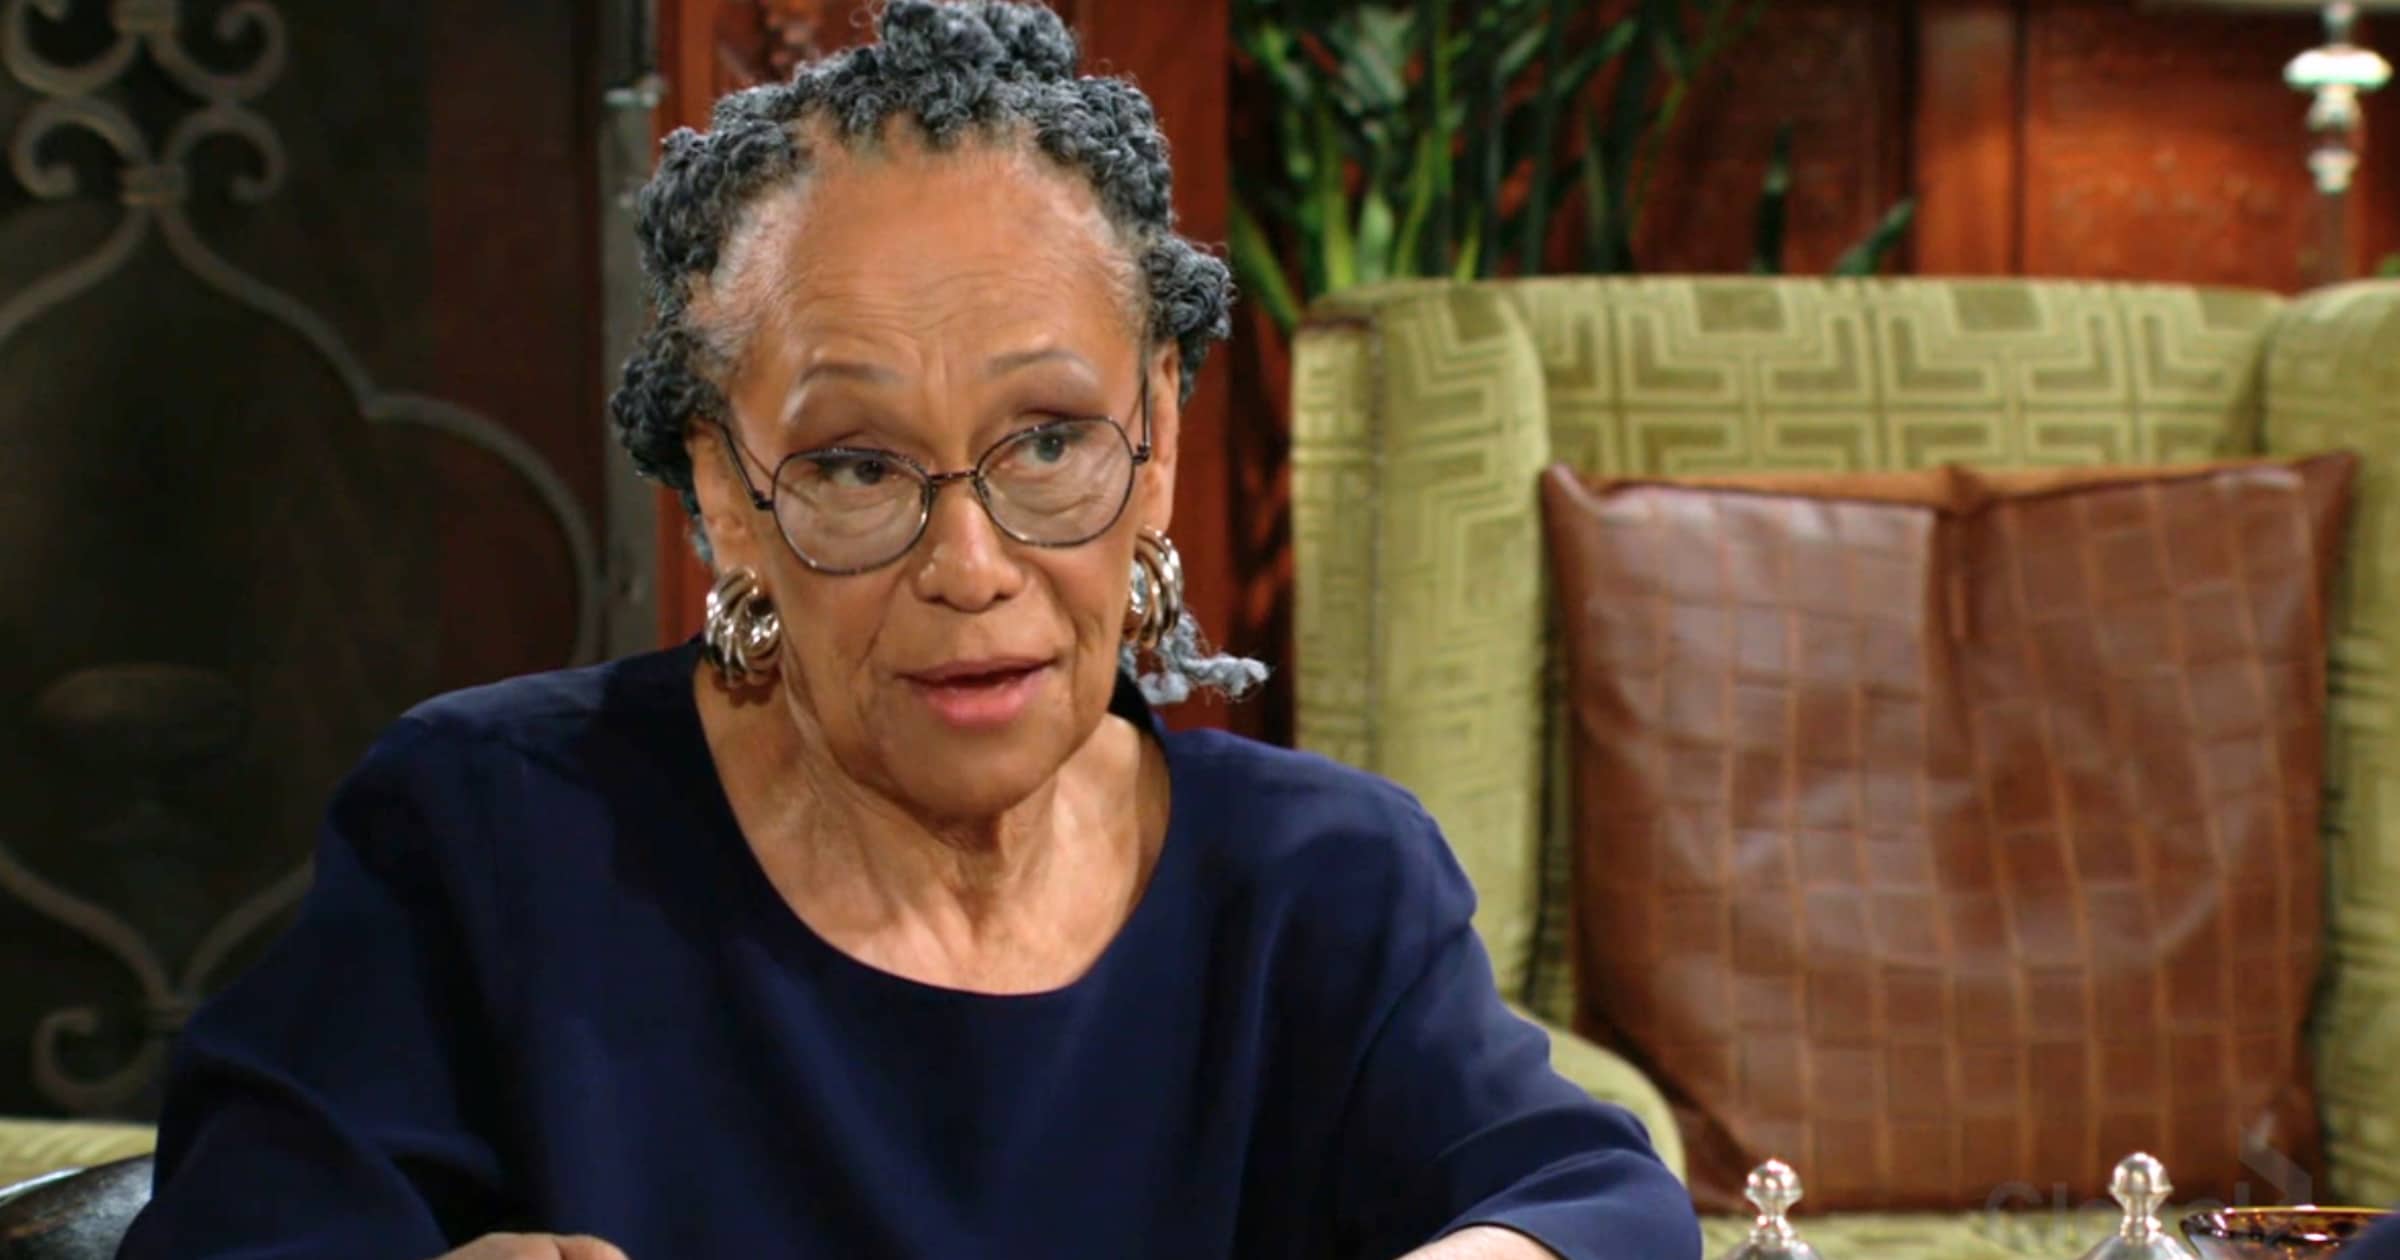 The Young and the Restless - Oct 26 - Mamie